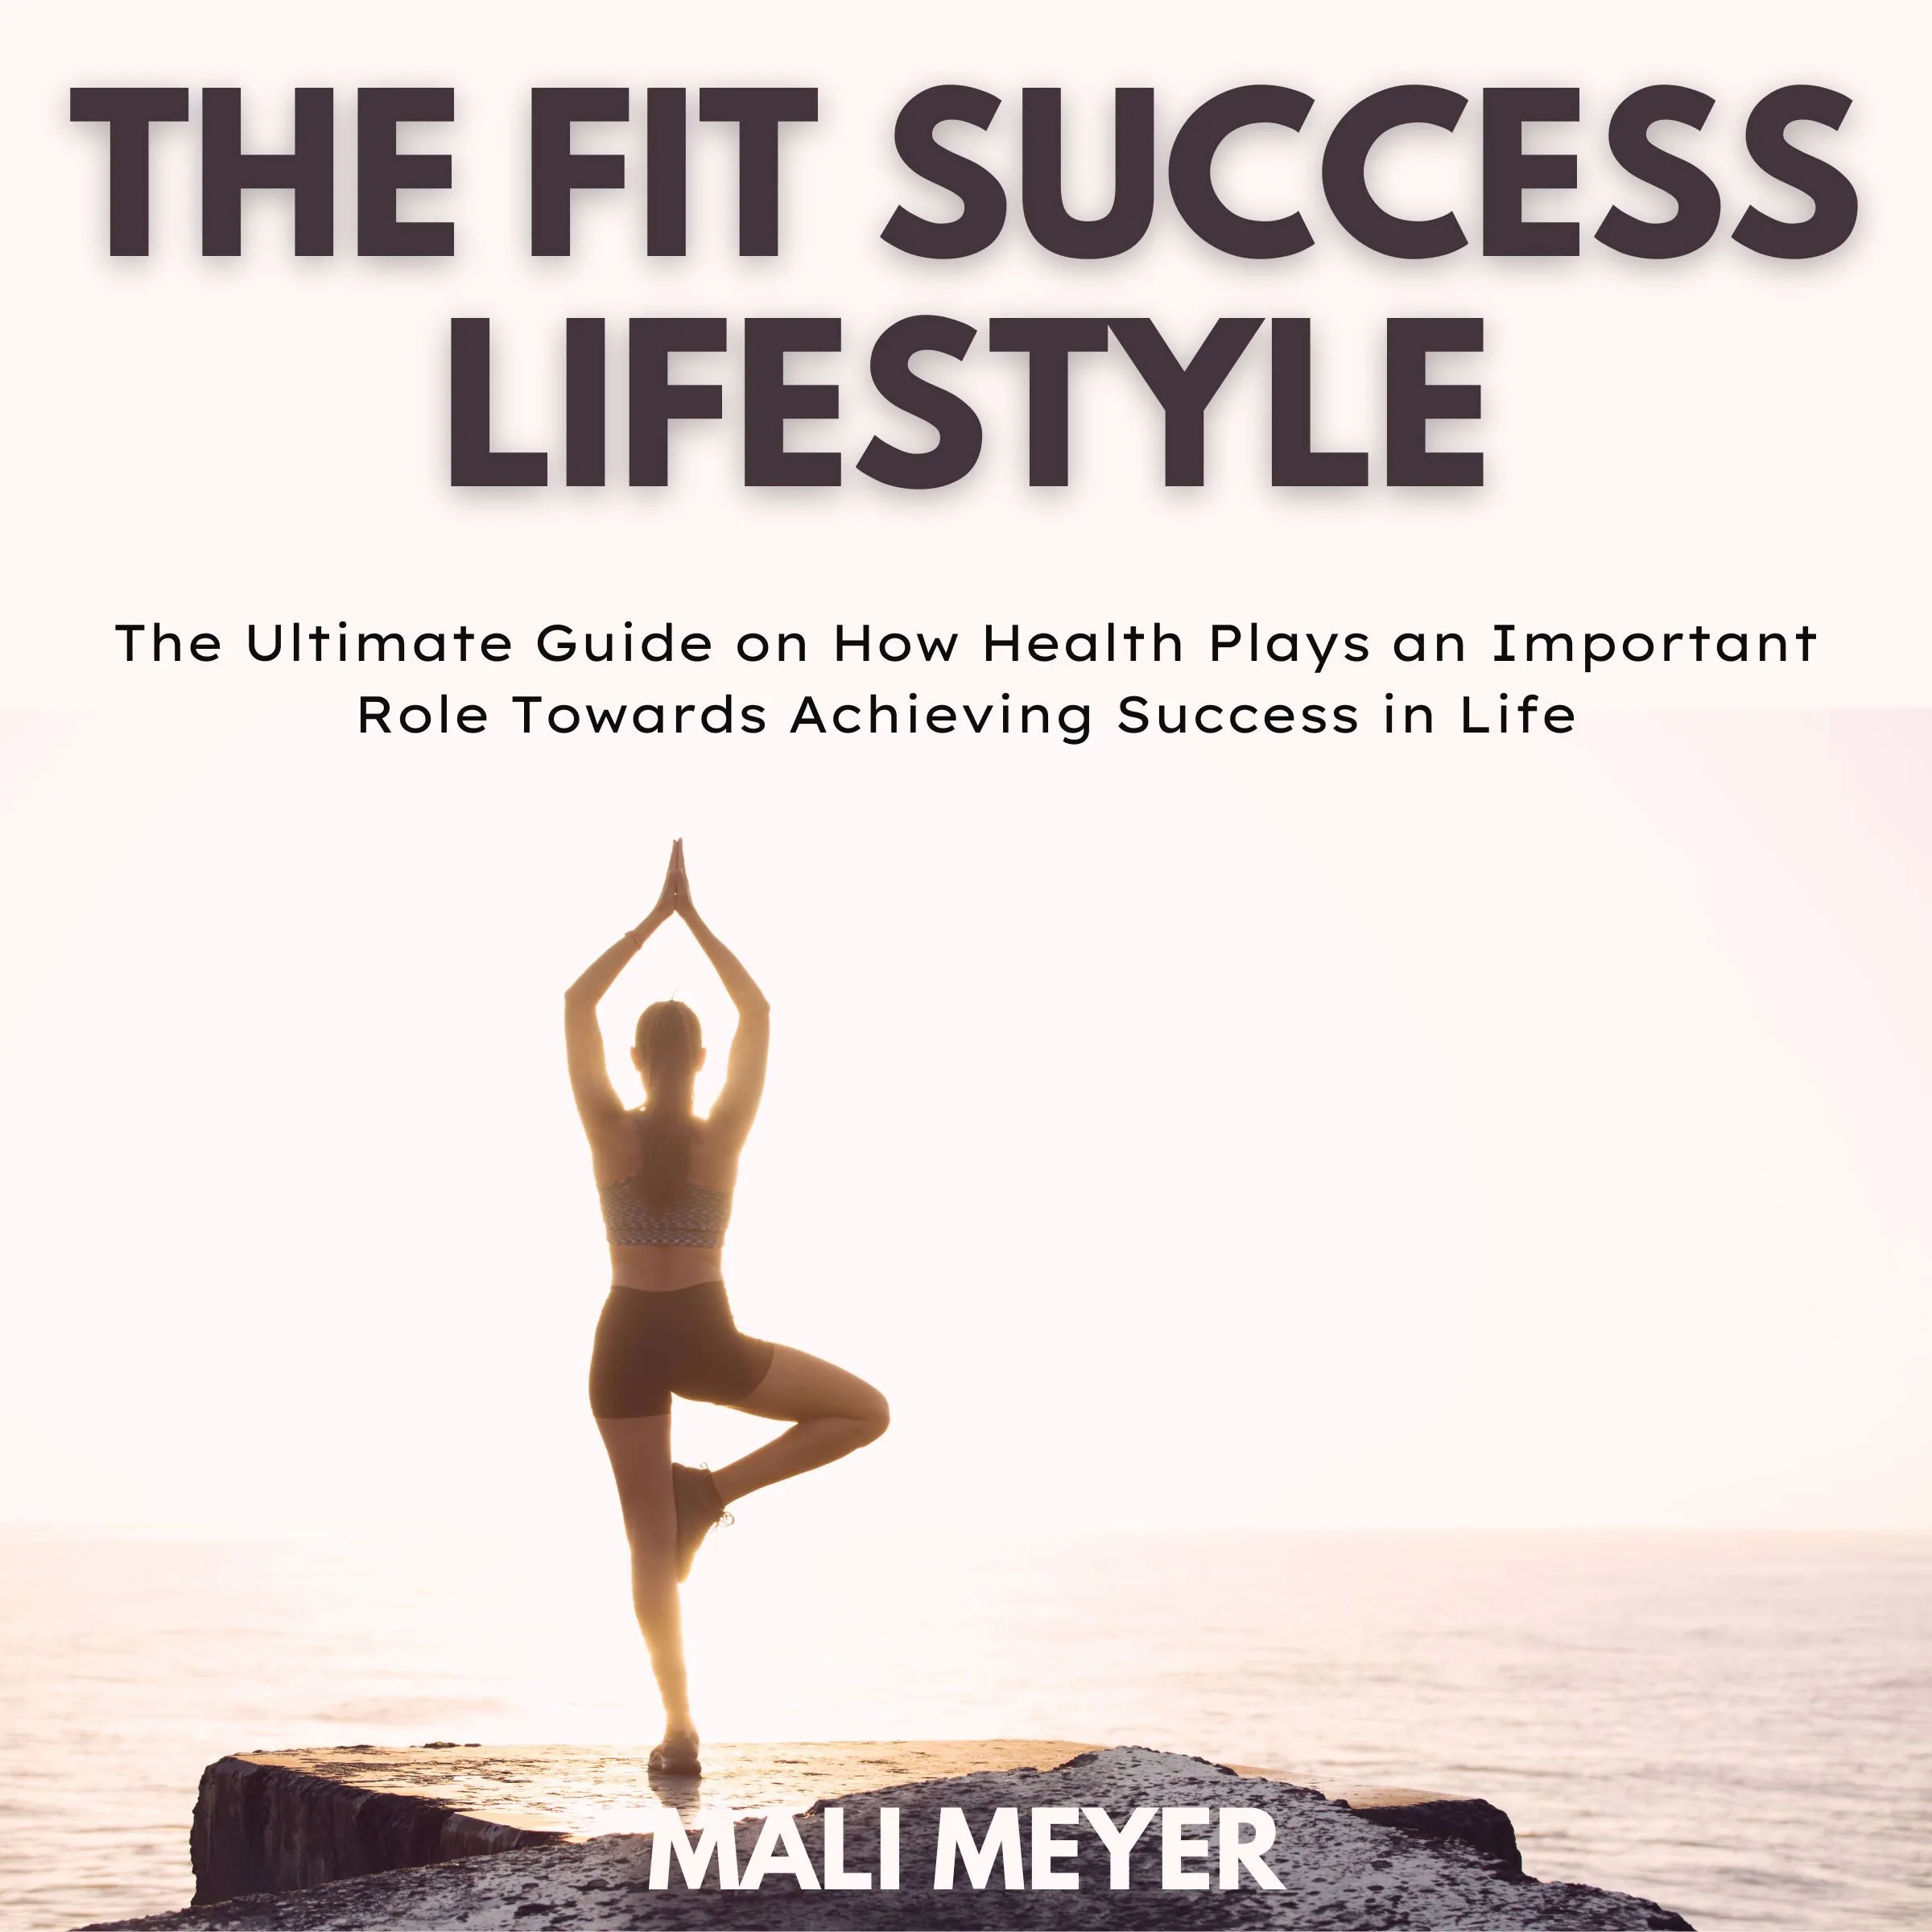 The Fit Success Lifestyle by Mali Meyer Audiobook